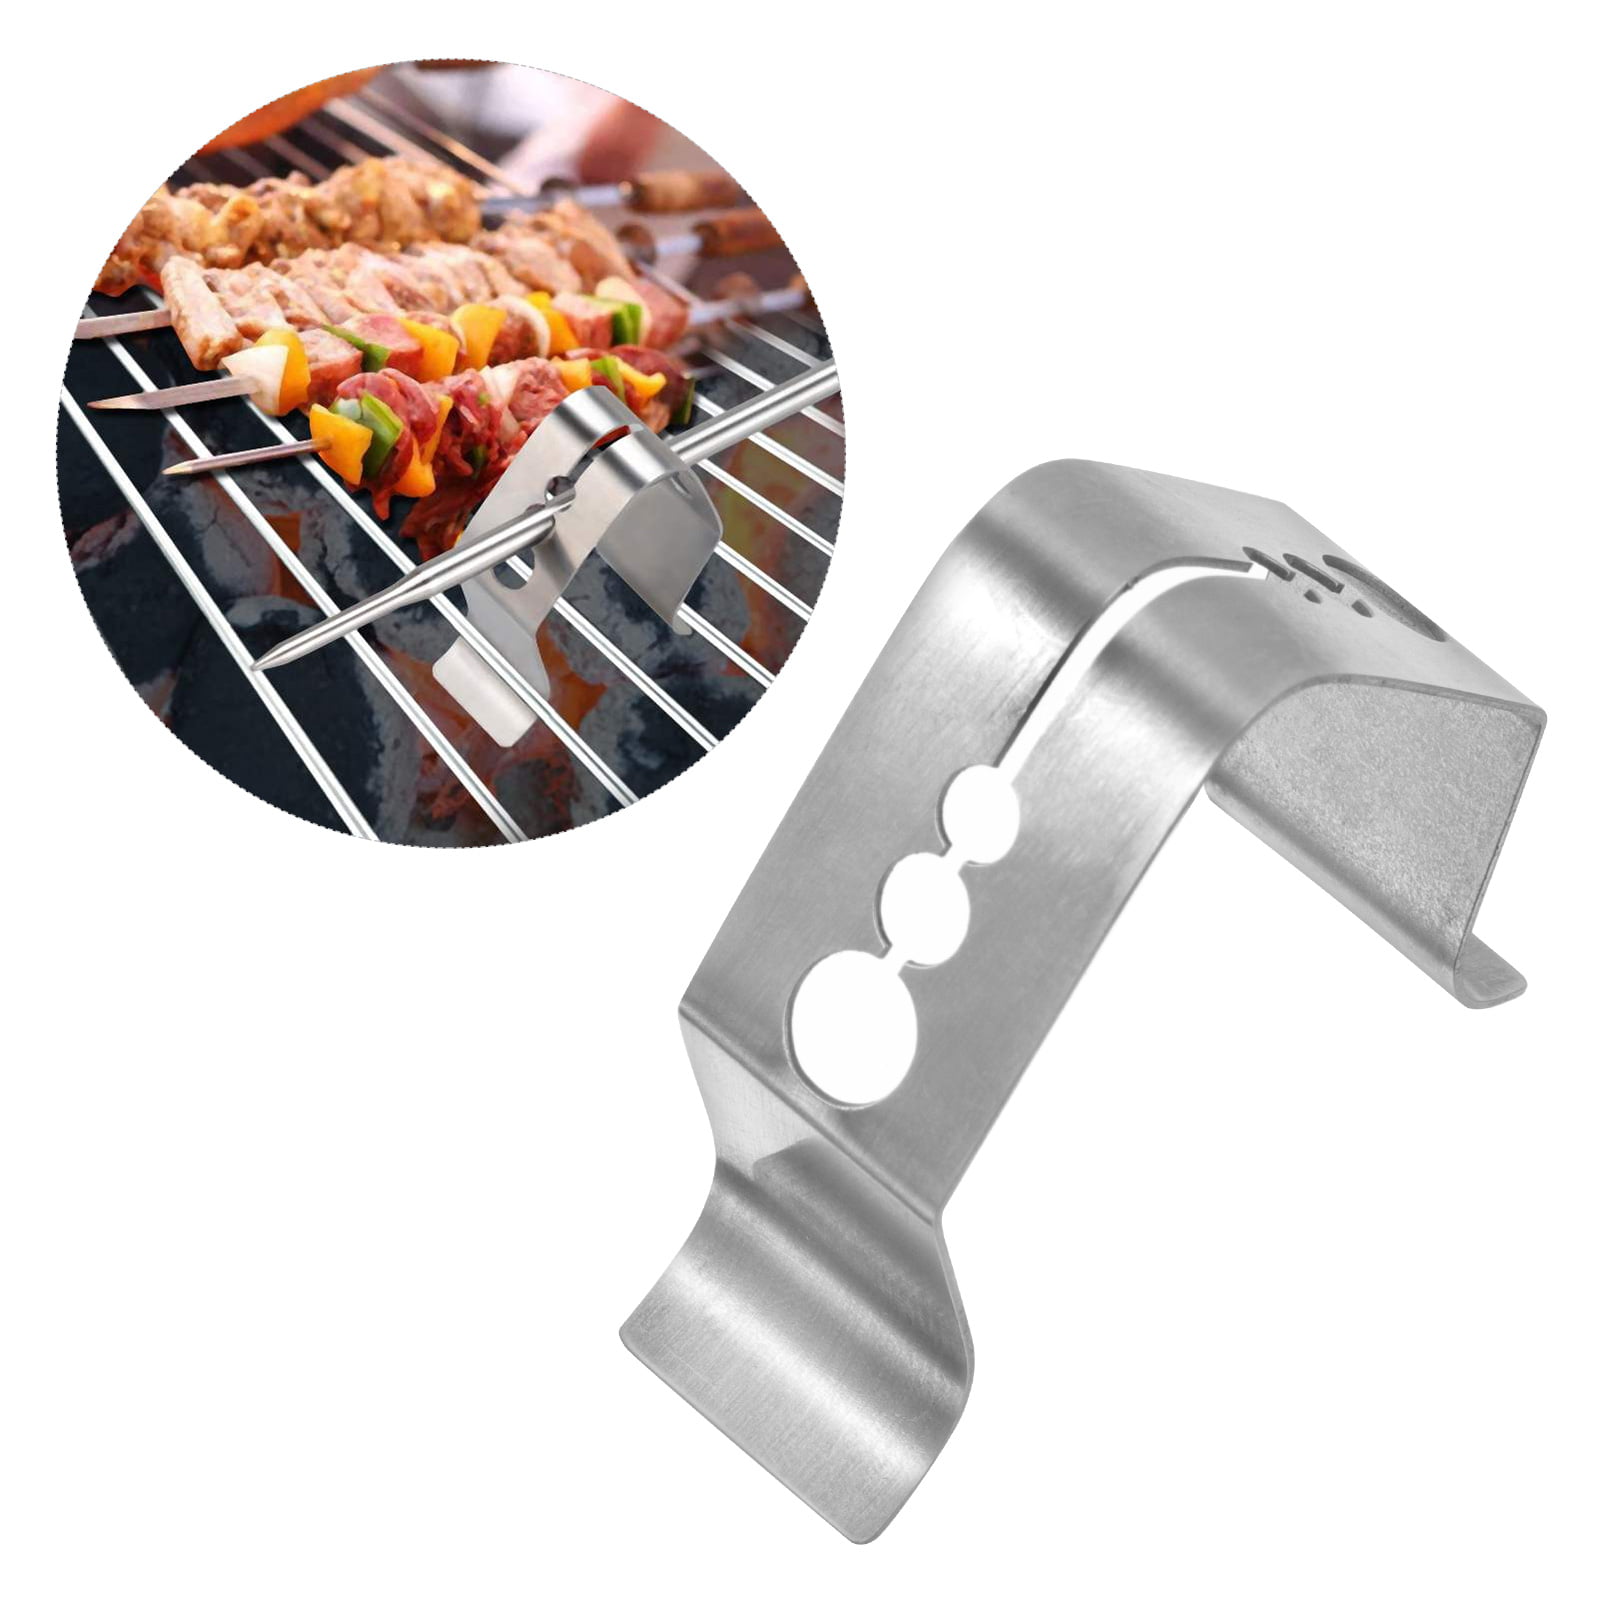 Universal Meat Thermometer Probe Clip - Meadow Creek Barbecue Supply